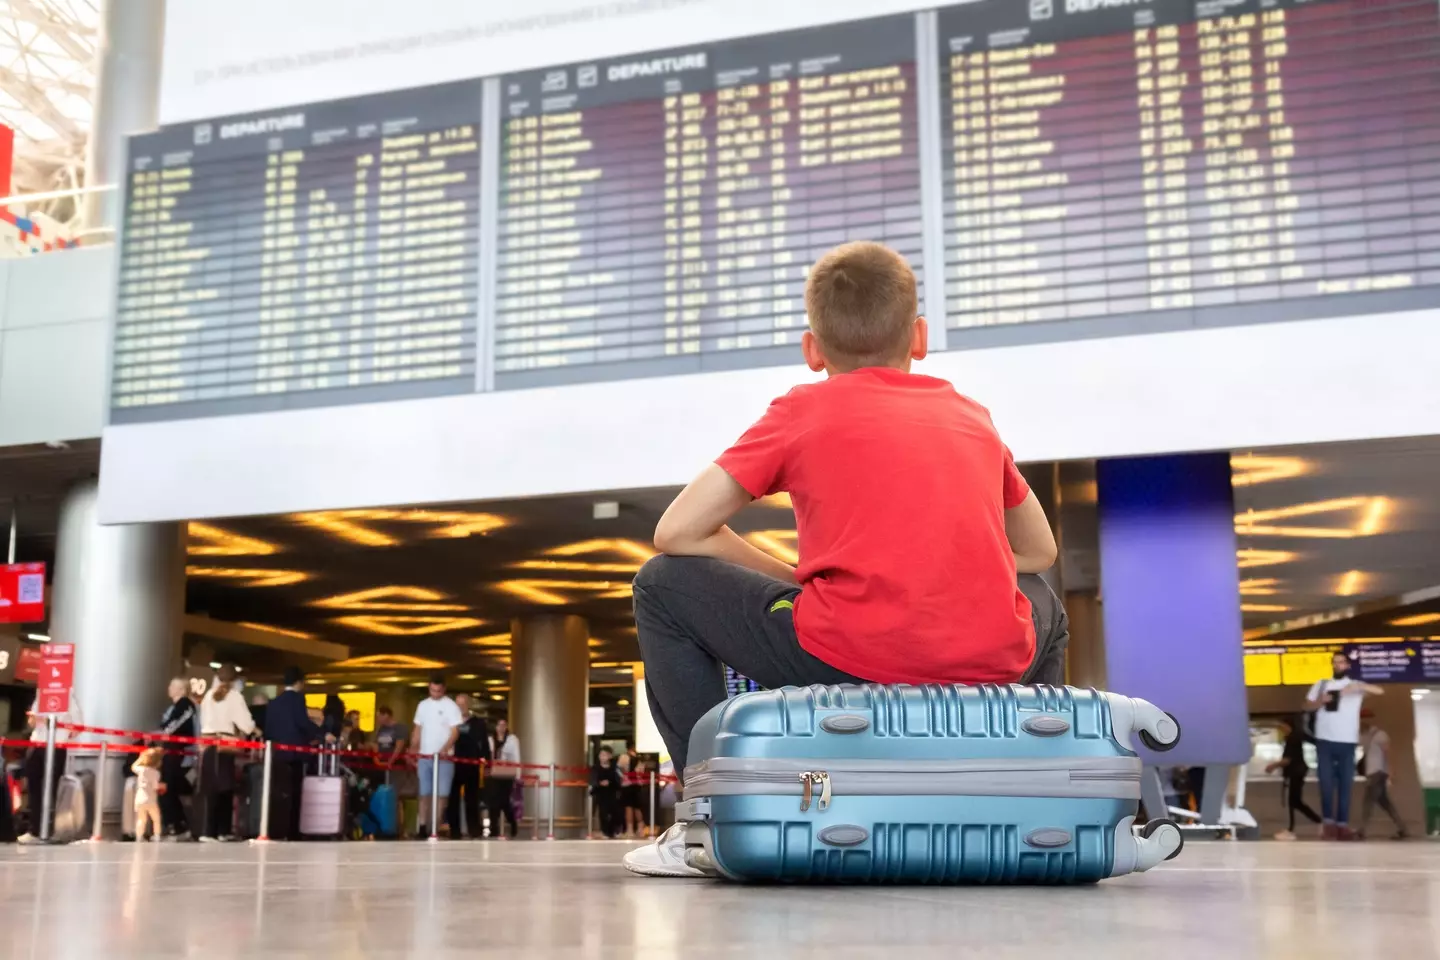 A boy looks at a flight information board after his flight is canned.